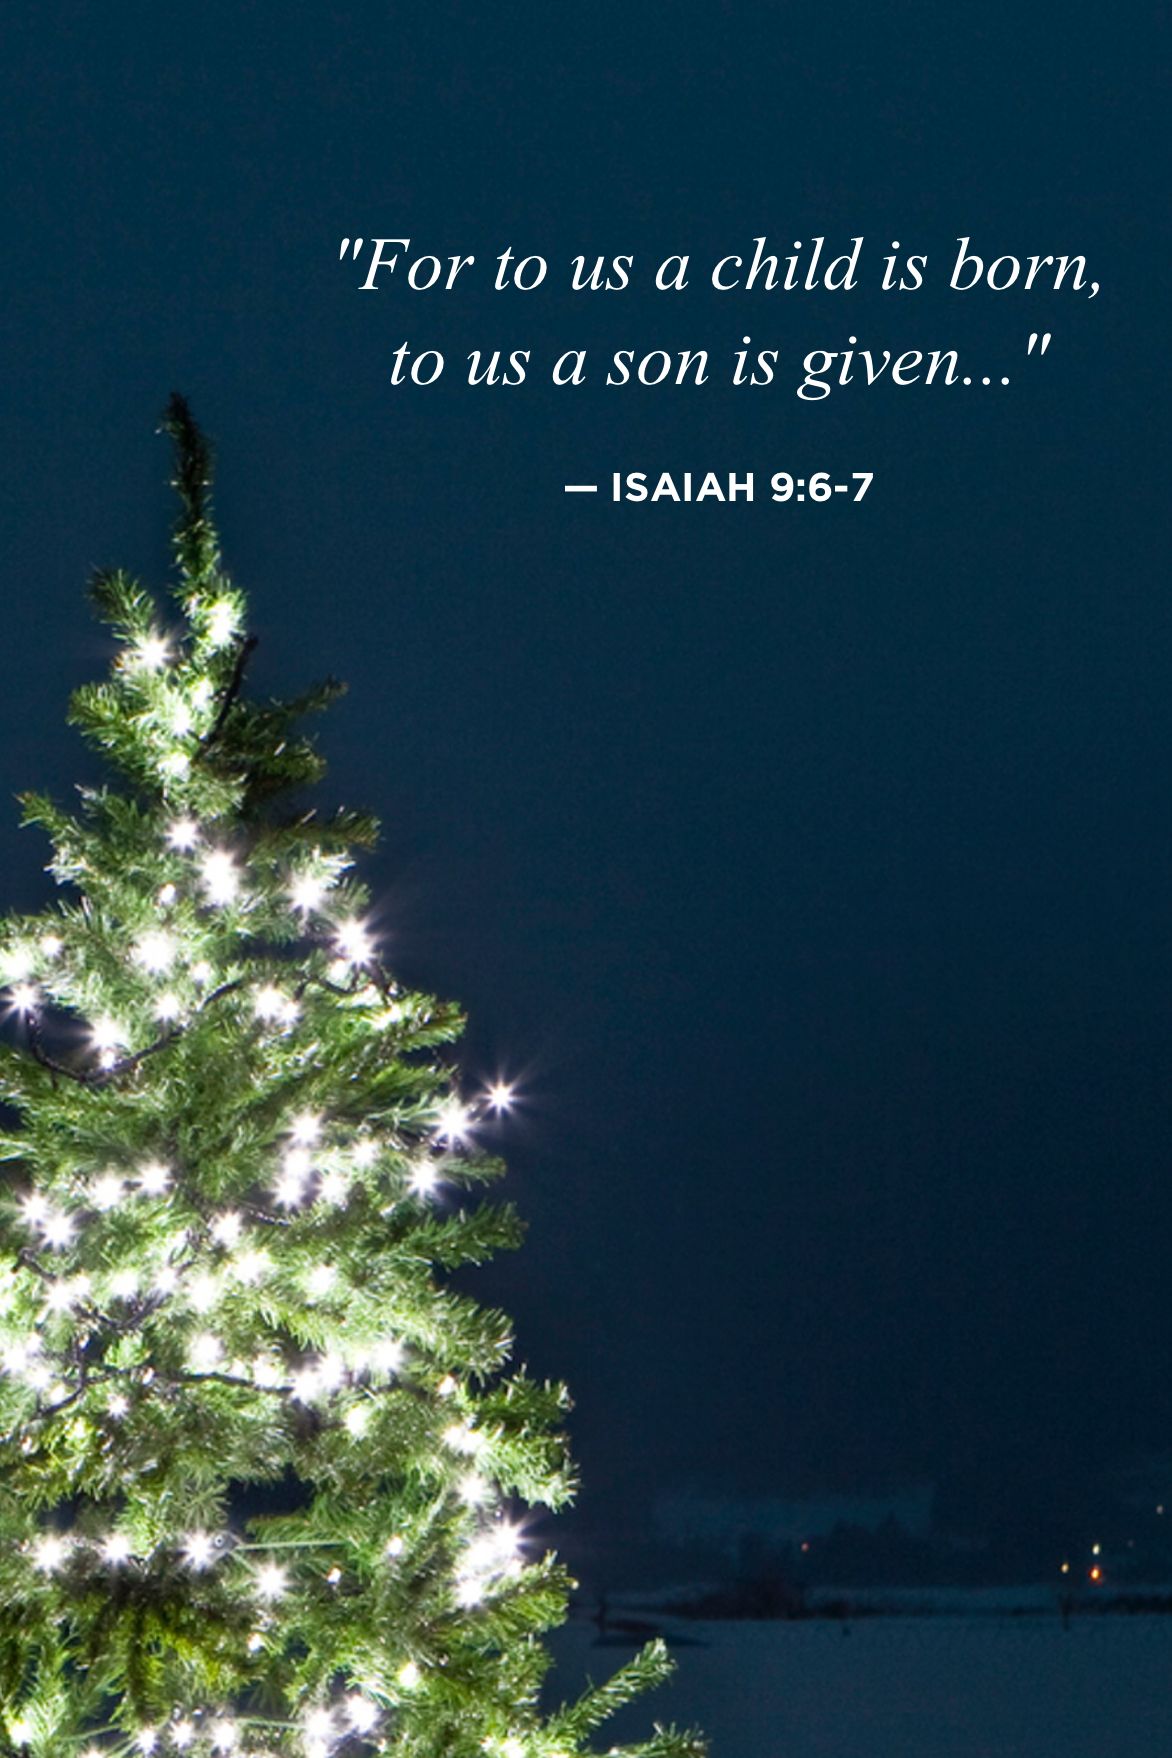 40+ Religious Christmas Quotes - Short Religious Christmas Quotes and Sayings